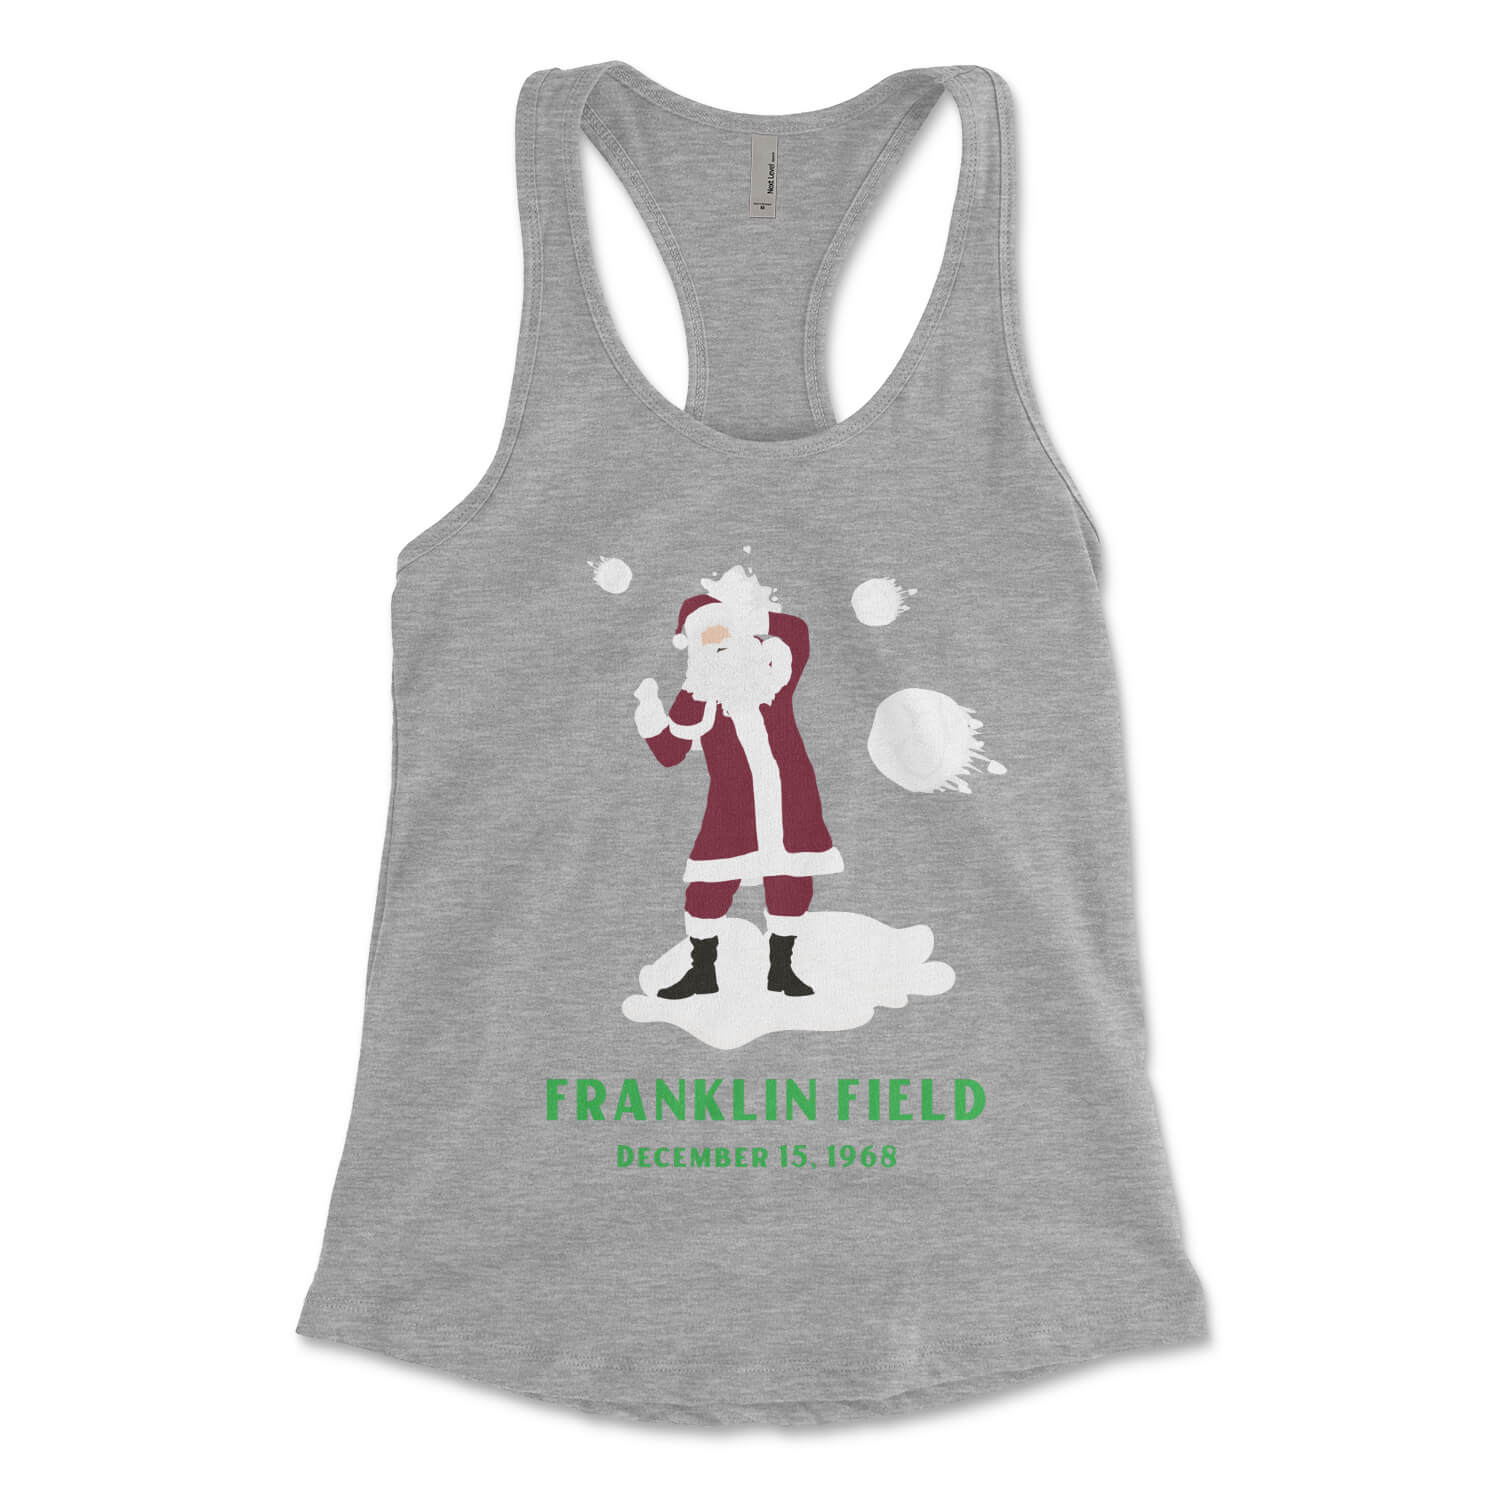 Philadelphia Eagles fans boo Santa Clause at Franklin Field heather grey womens racerback tank top from Phillygoat